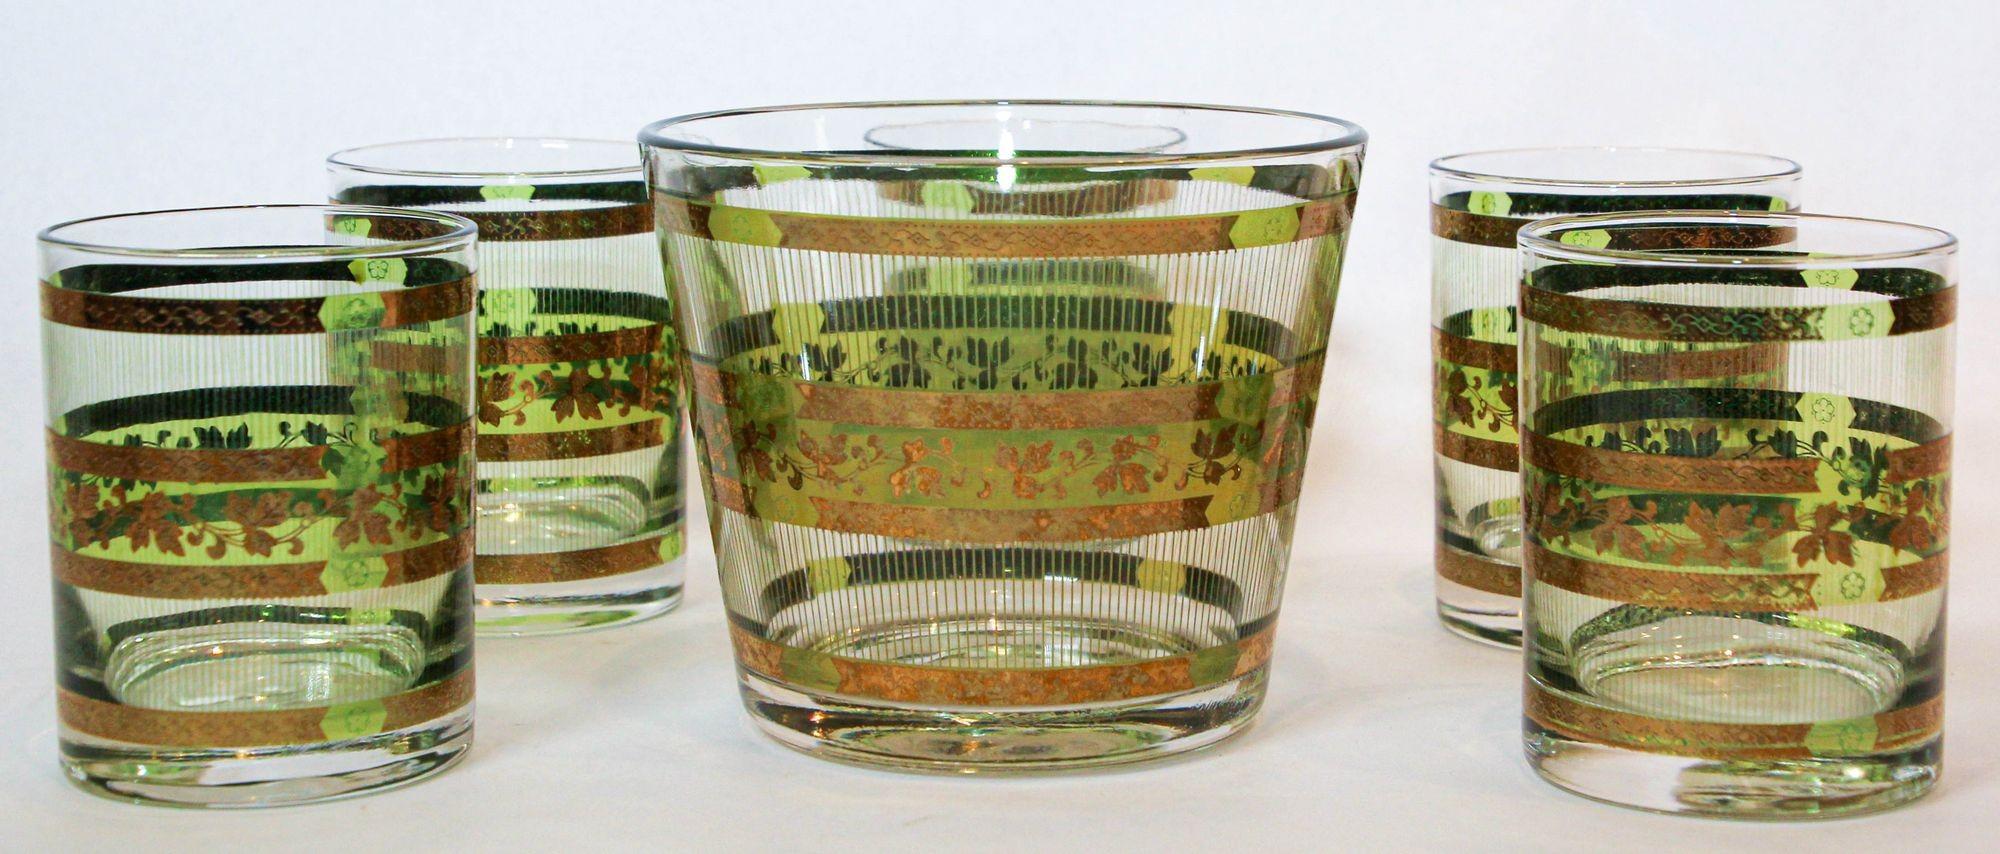 Vintage Mid-Century Modern culver Stralyte style embossed, raised, textured design on bands alternating green and gold design with leaves and 22 karat Gold Stripes set of one ice bucket and five large rock glasses.
Mid Century green and 22 Karat